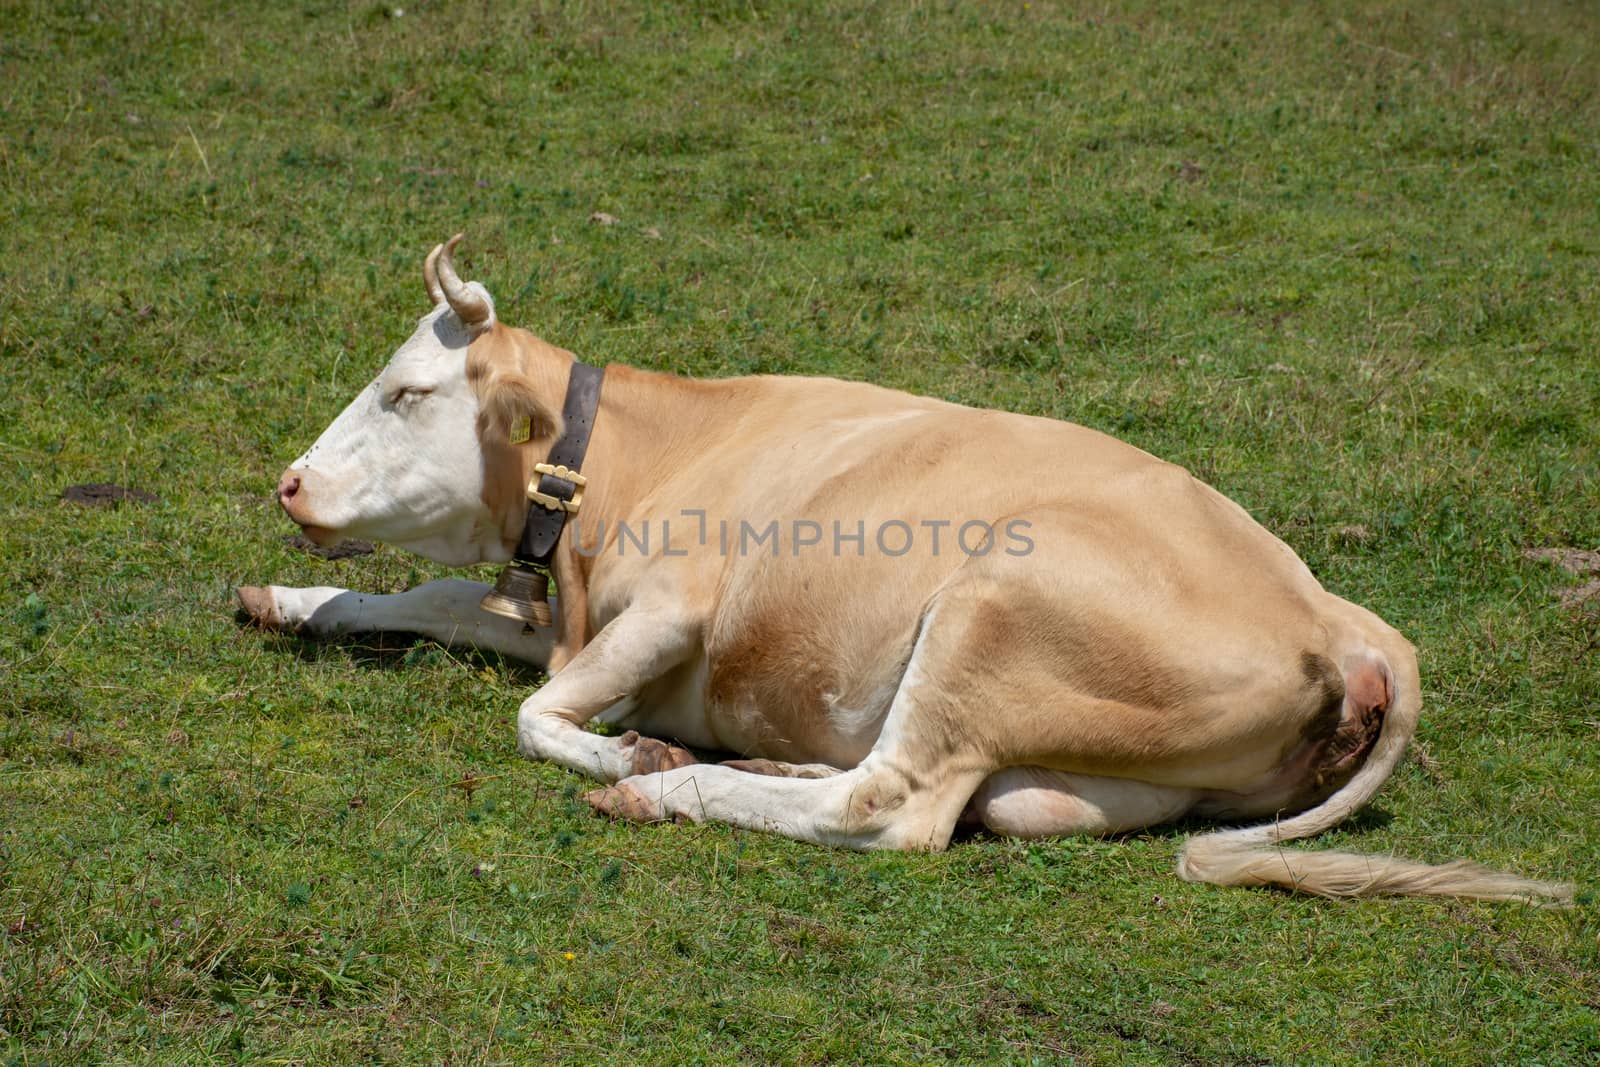 A cow with its bell sitting in the alps in a Switzerland Field enjoiny gthe summer sun.